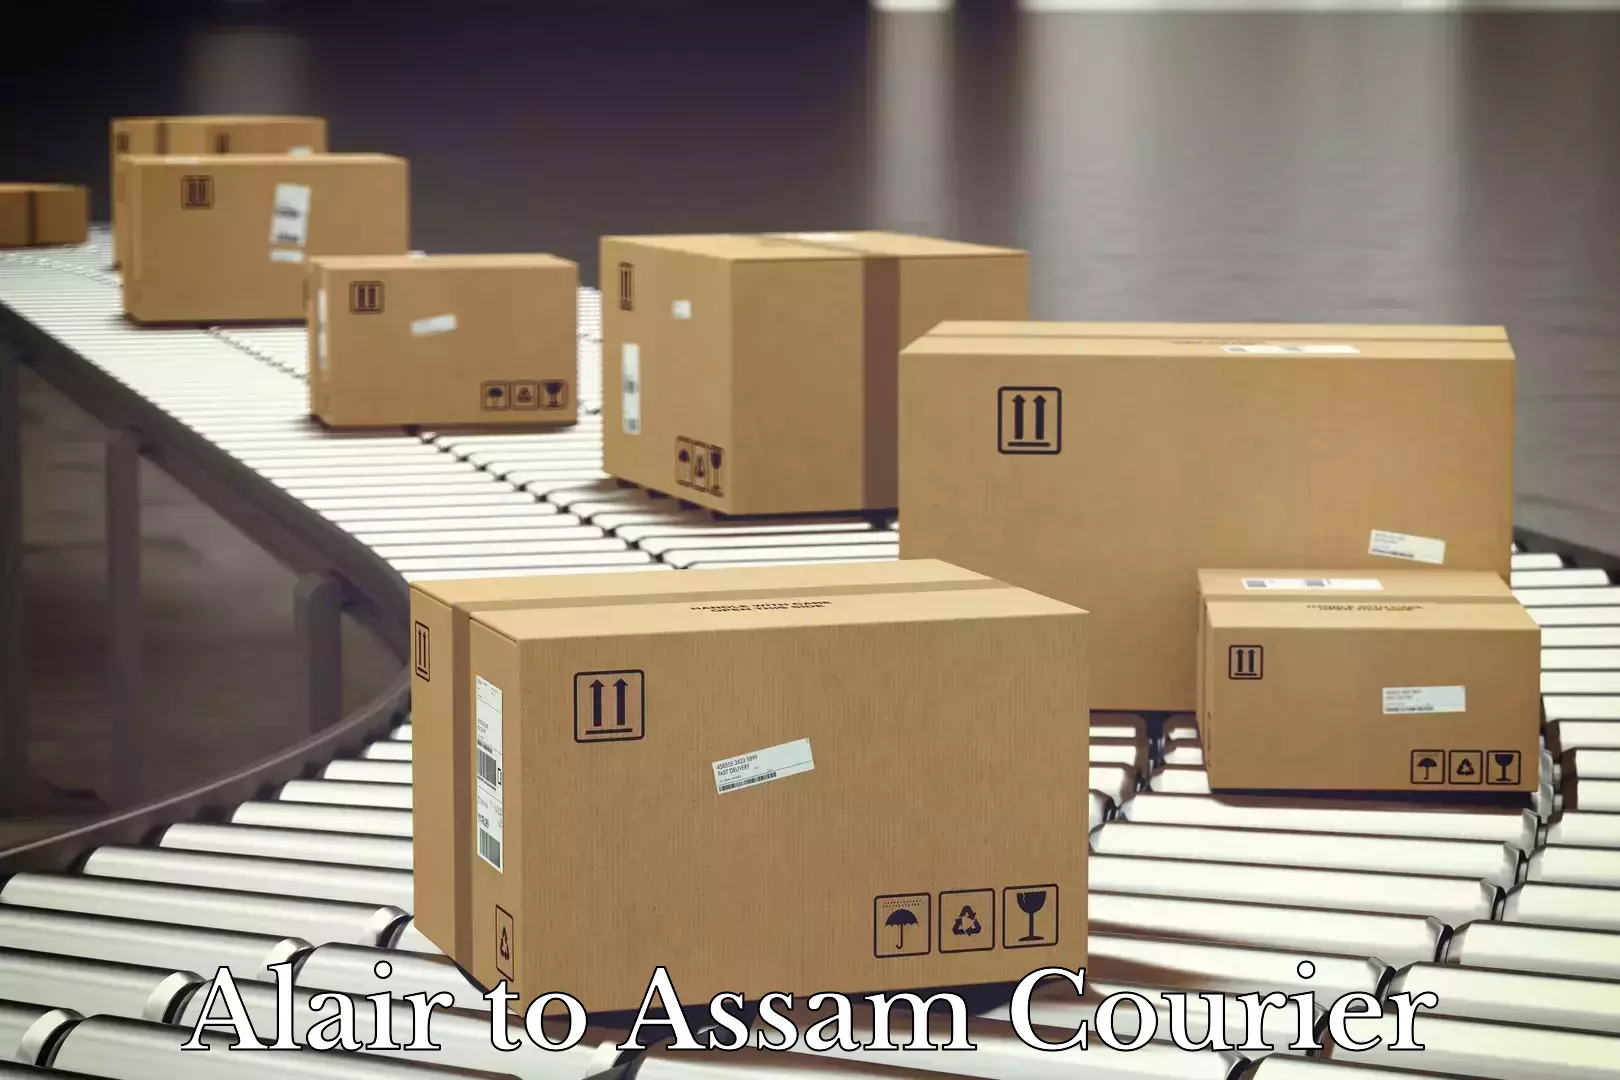 Delivery service partnership Alair to Assam